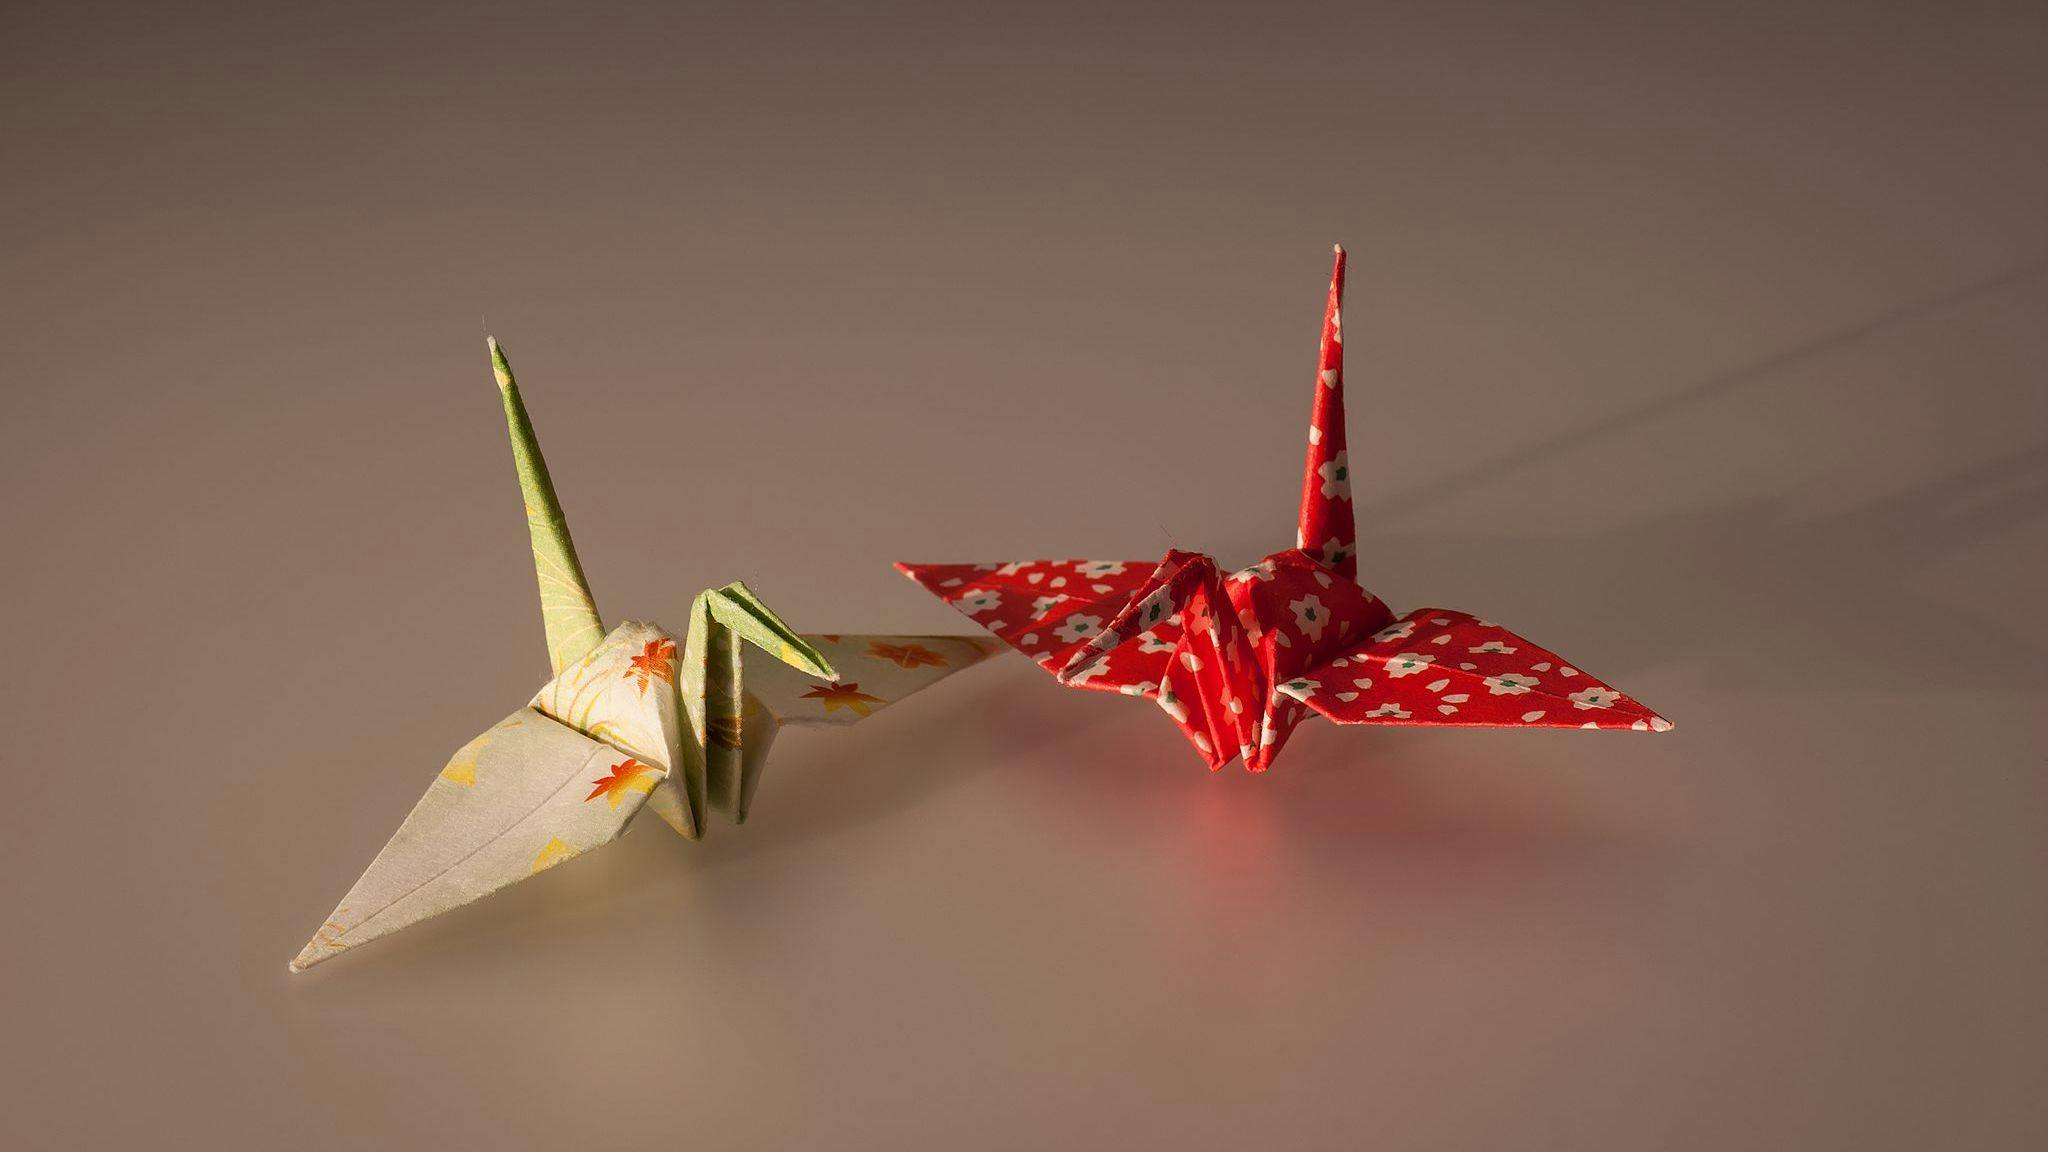 Cranes made by Origami paper